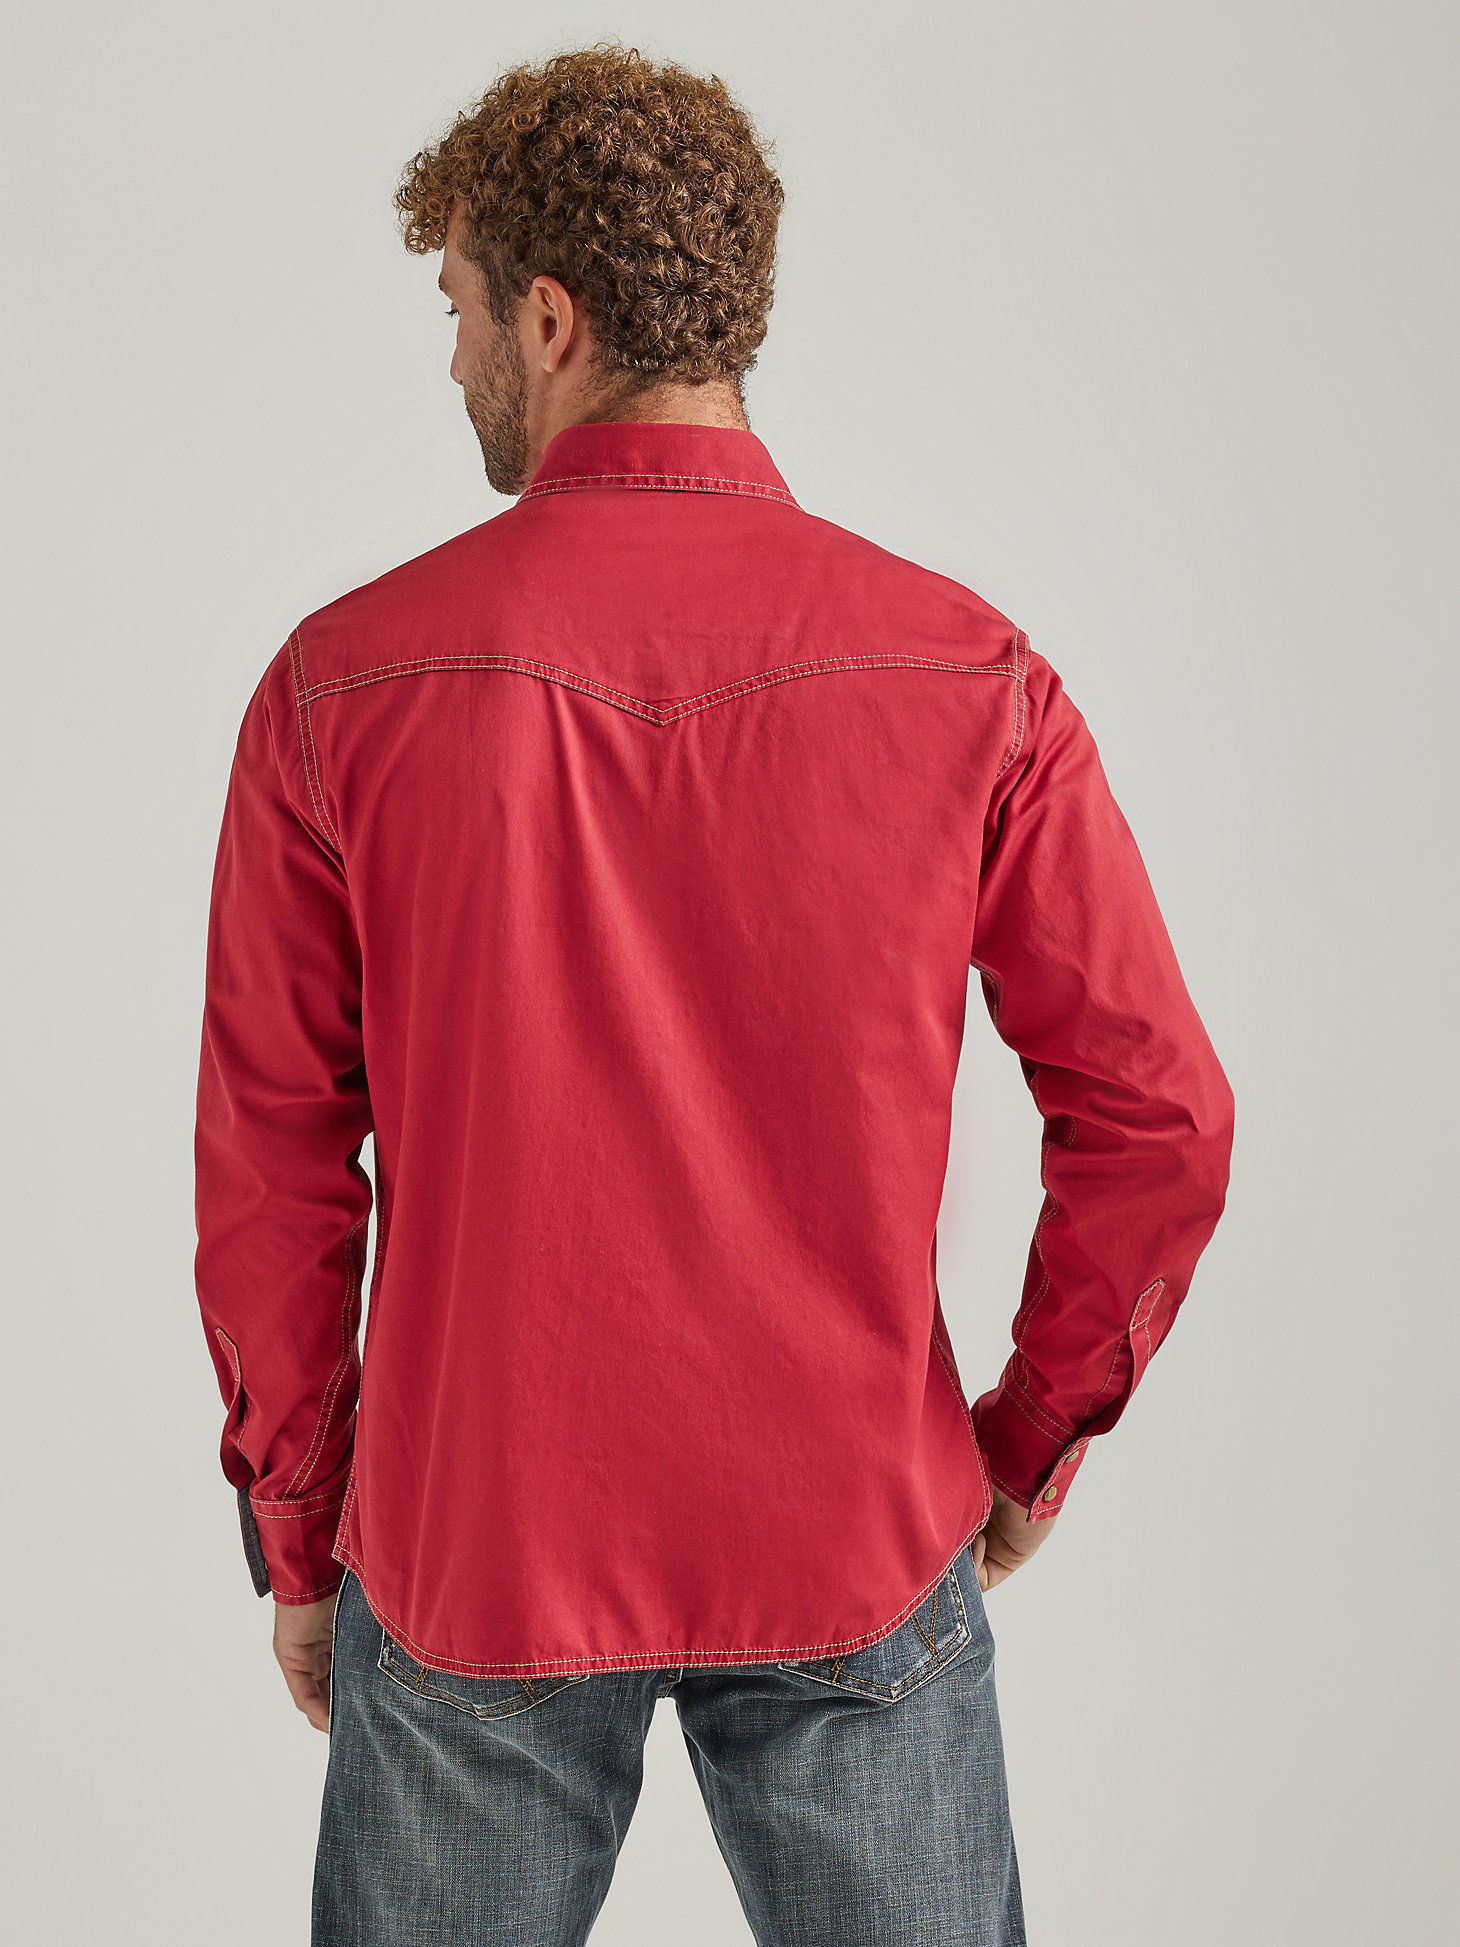 Men's Wrangler Retro® Premium Long Sleeve Button-Down Solid Shirt in Chili Red alternative view 1